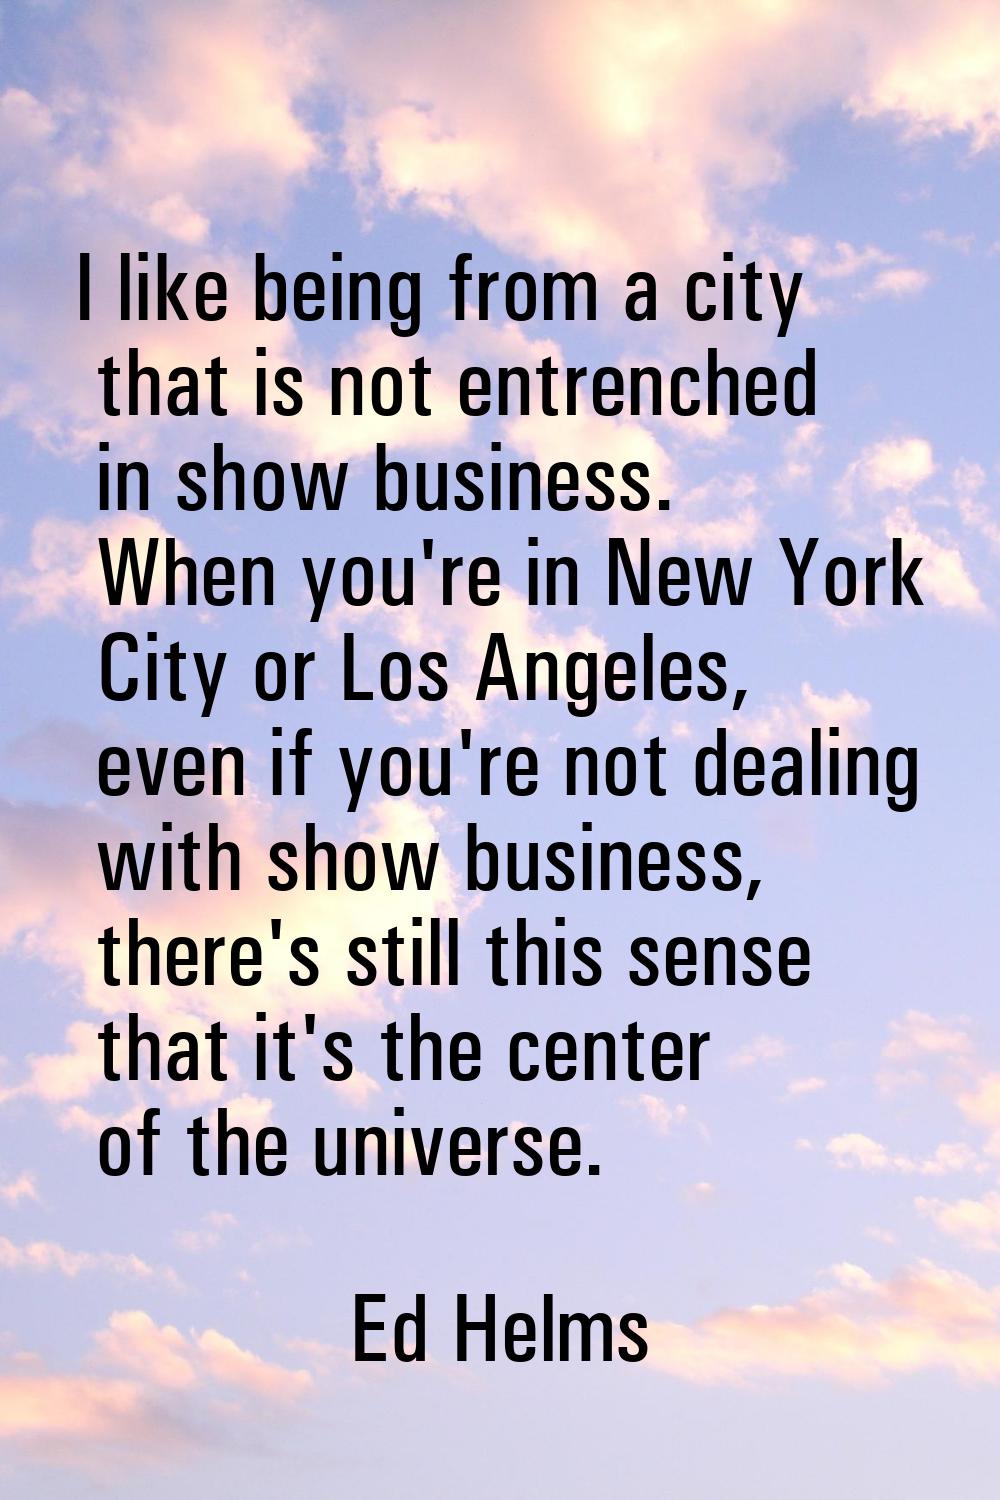 I like being from a city that is not entrenched in show business. When you're in New York City or L